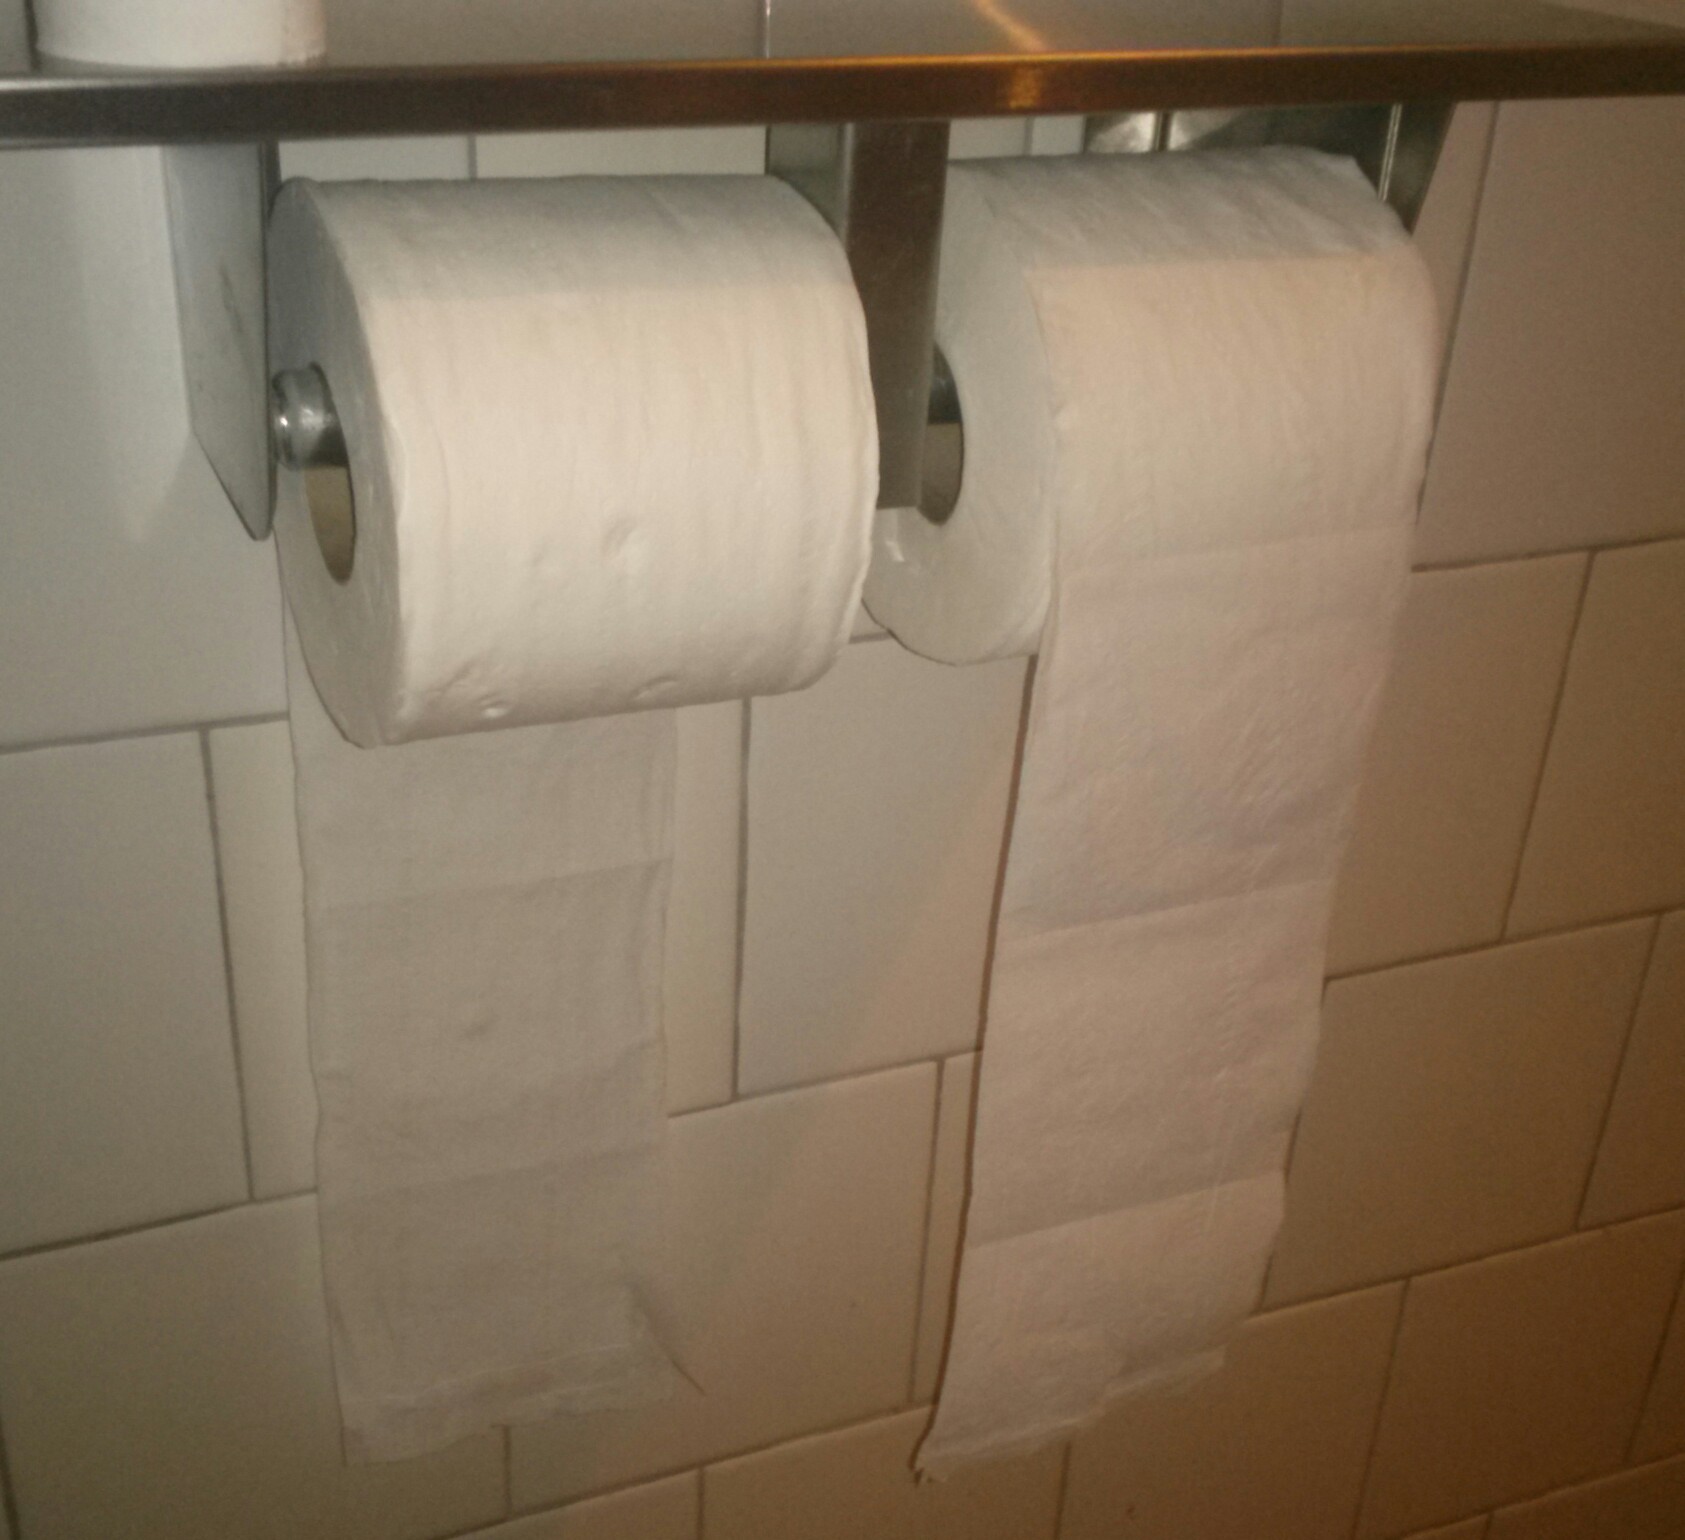 this was on a restaurant bathroom, toilet paper for two kind of people (original btw) - meme